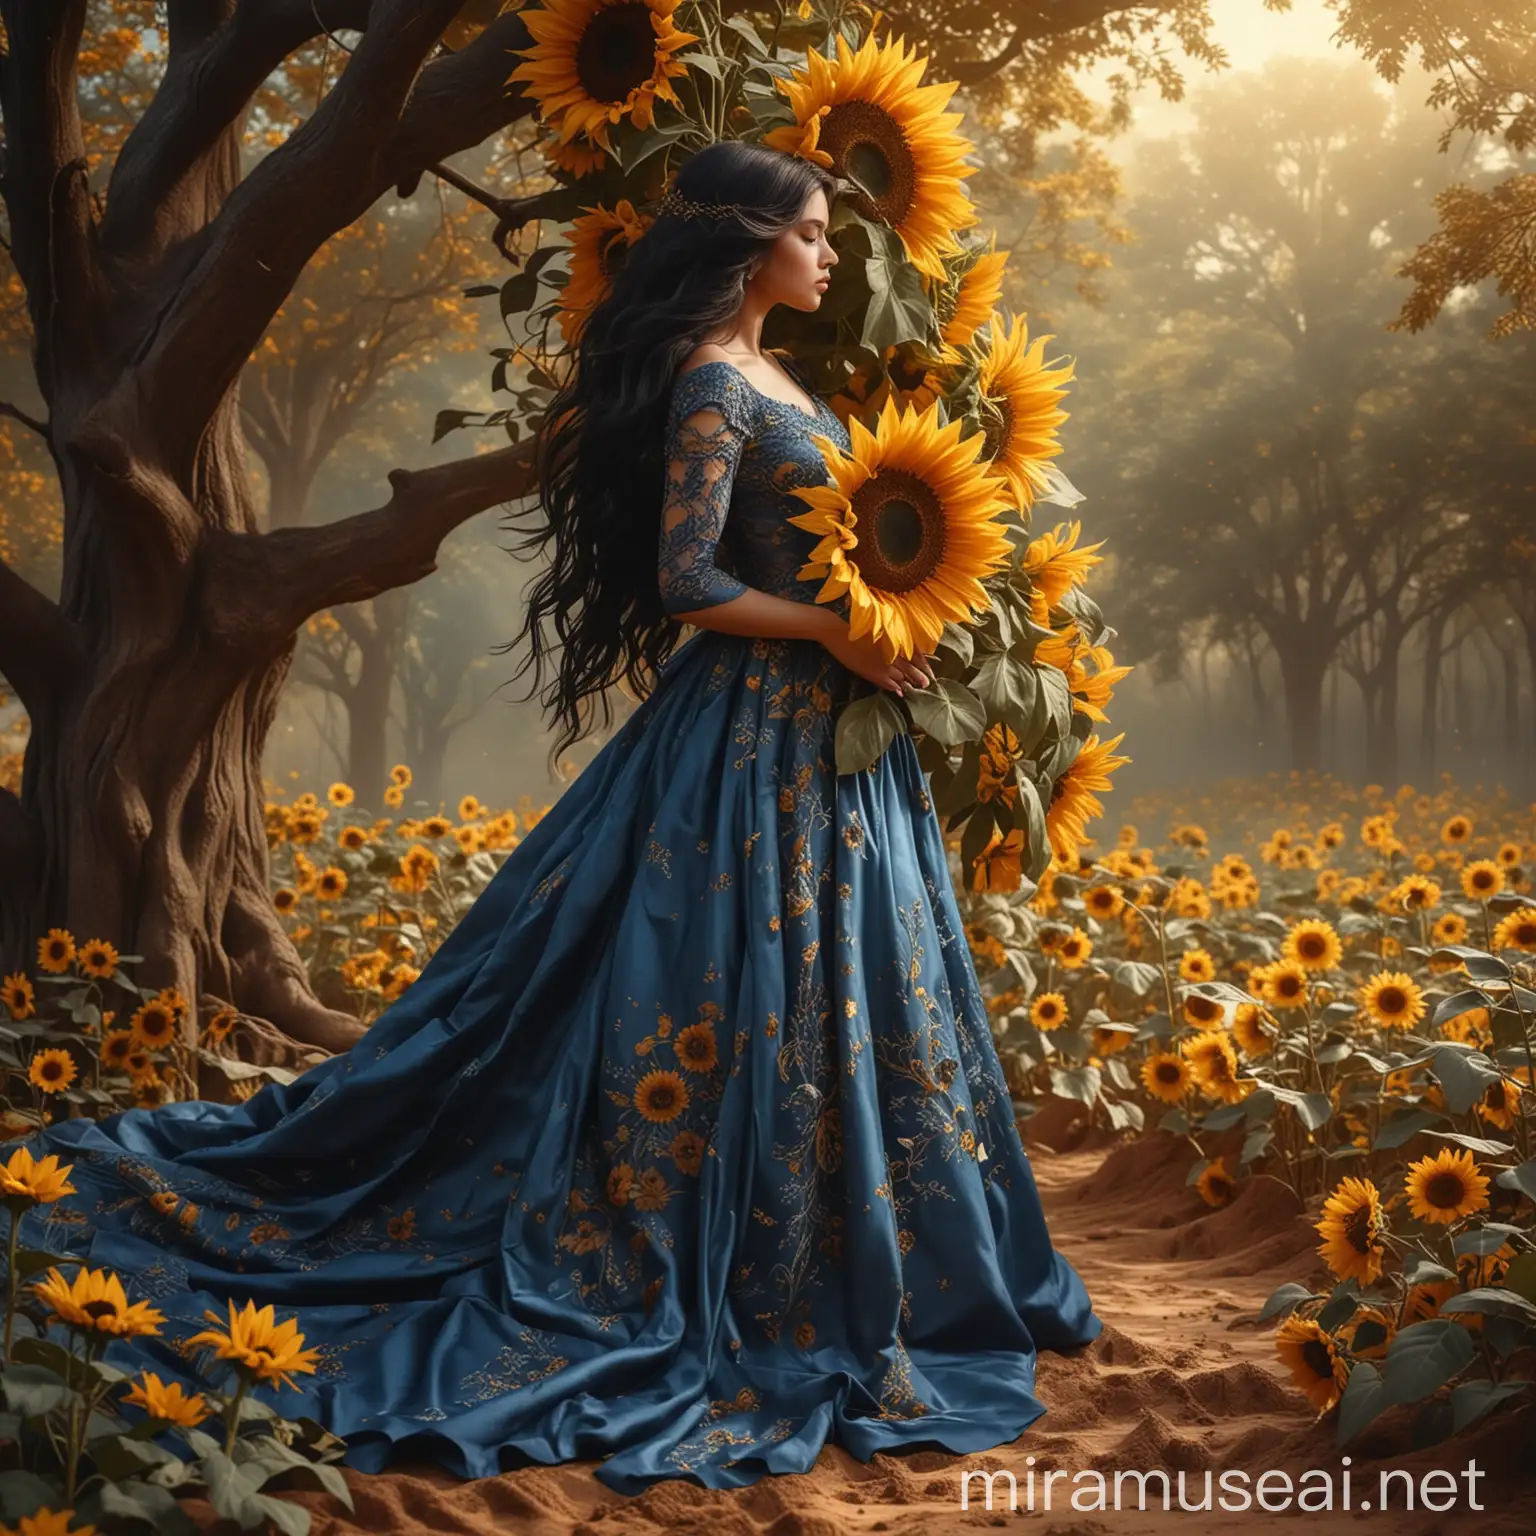 Elegant Woman with Sunflower in Enchanted Garden